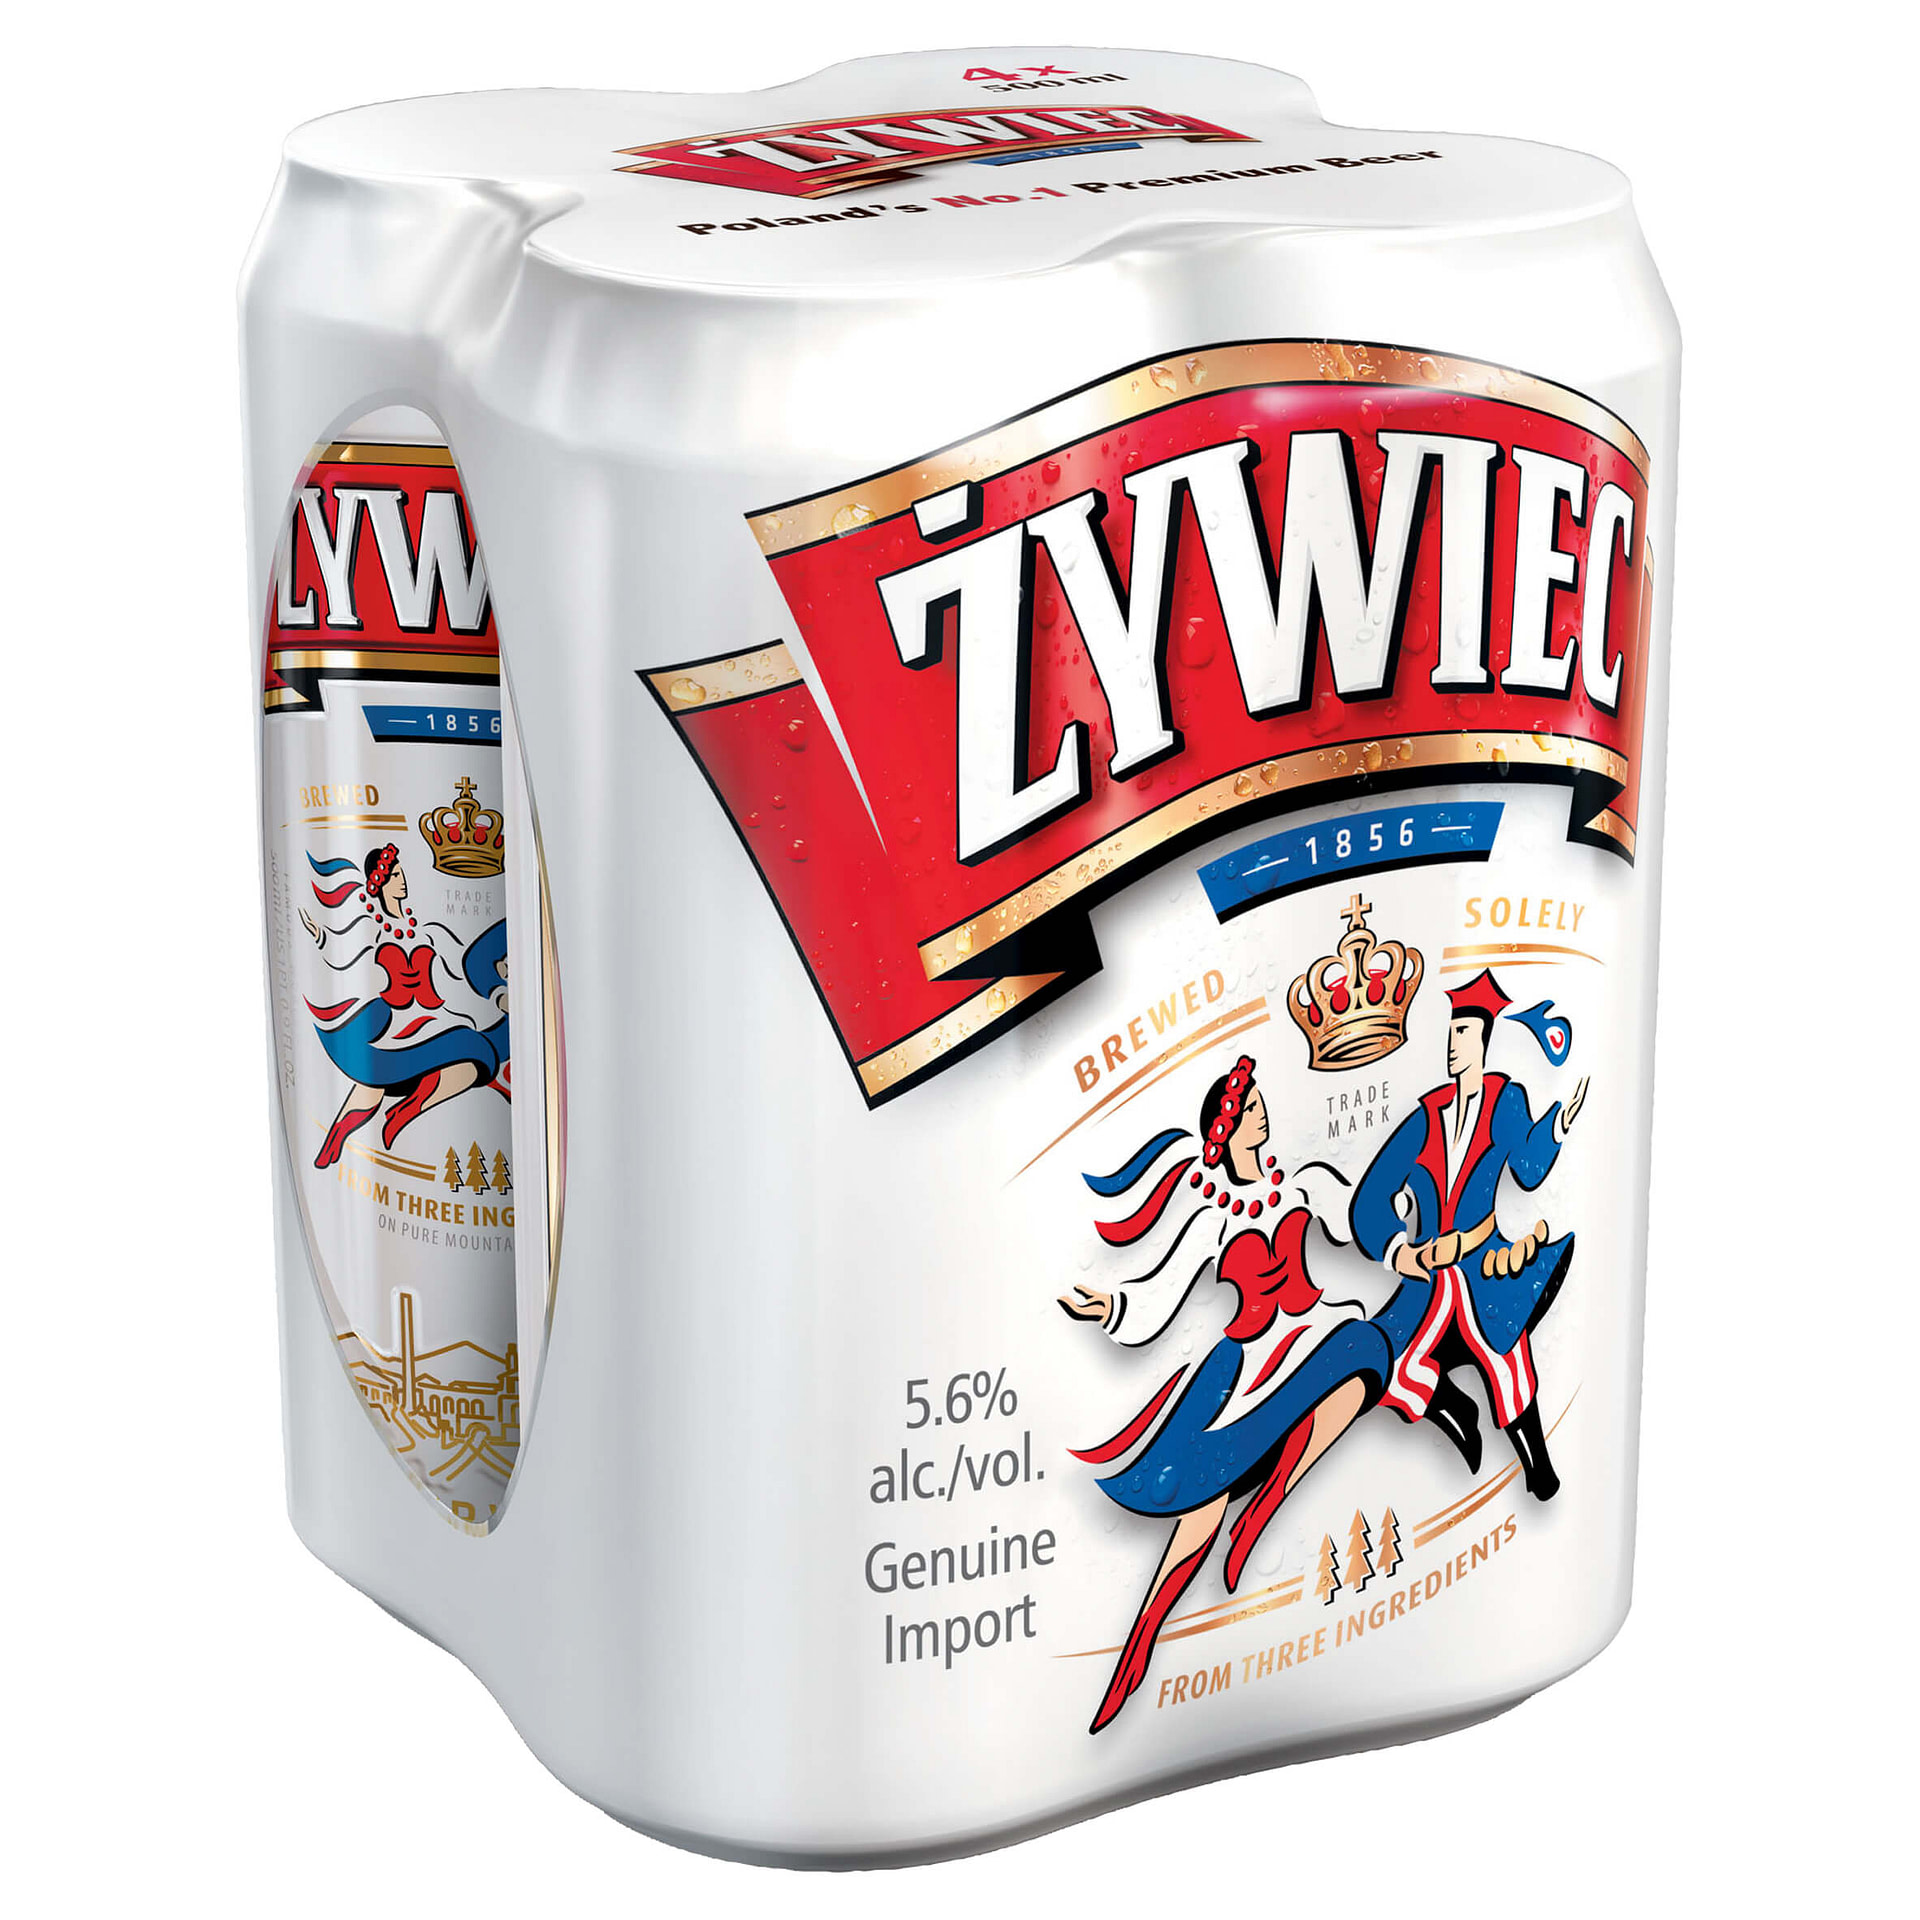 zywiec-polish-lager-500ml-can-4-pack-aft-drinkscash-carry